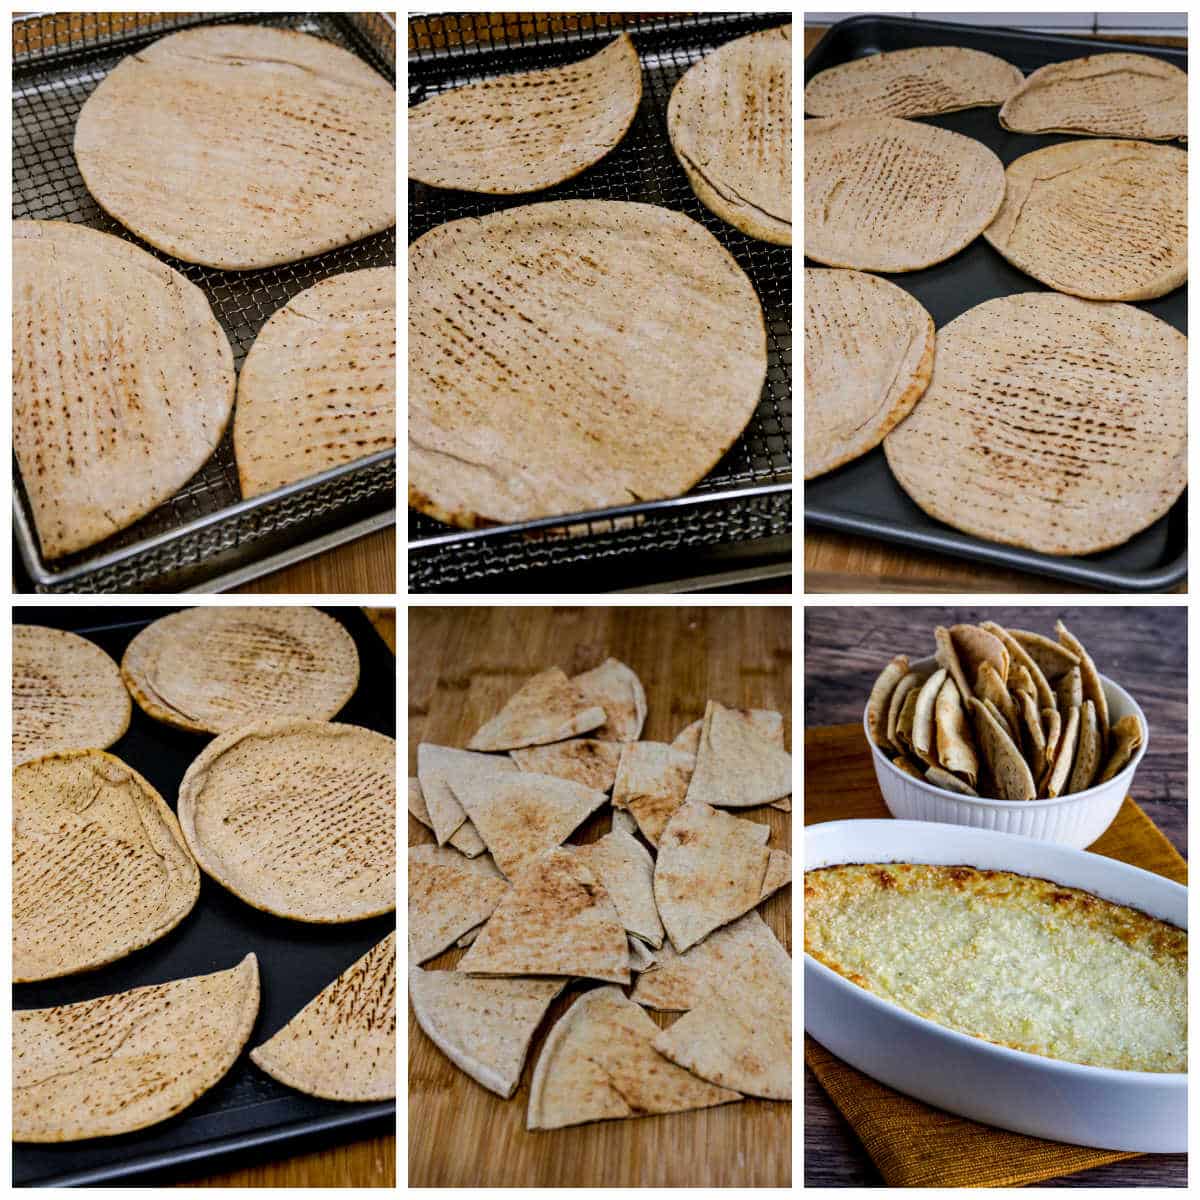 Toasting low-carb pita bread for Hot Artichoke Dip with Peperoncini, collage photo.